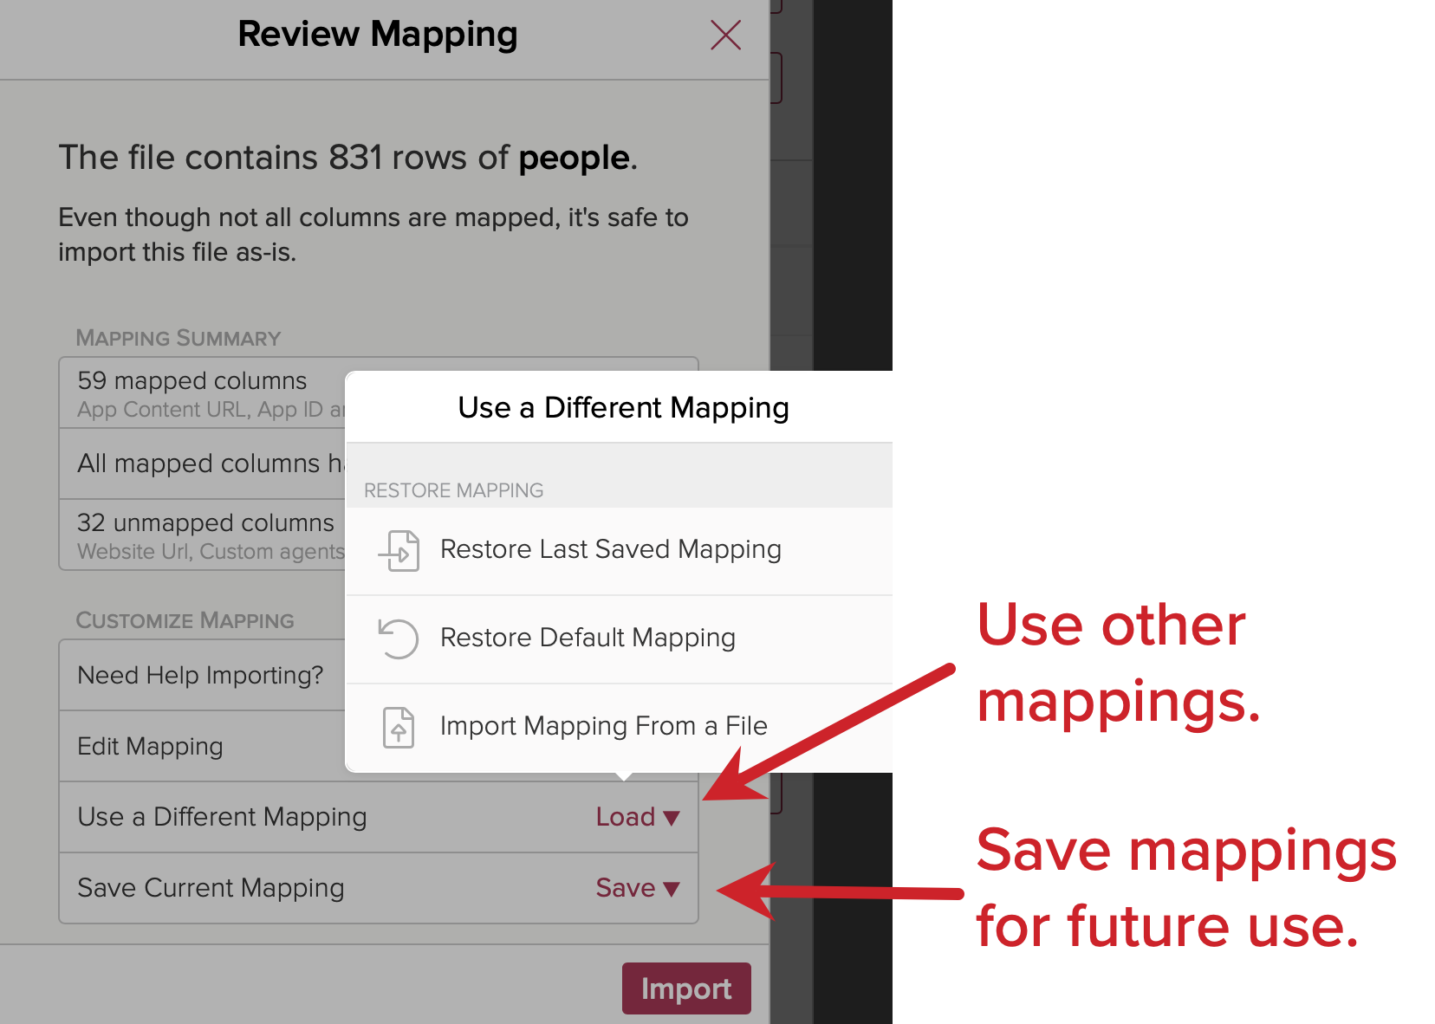 Cloze - save import mapping. 